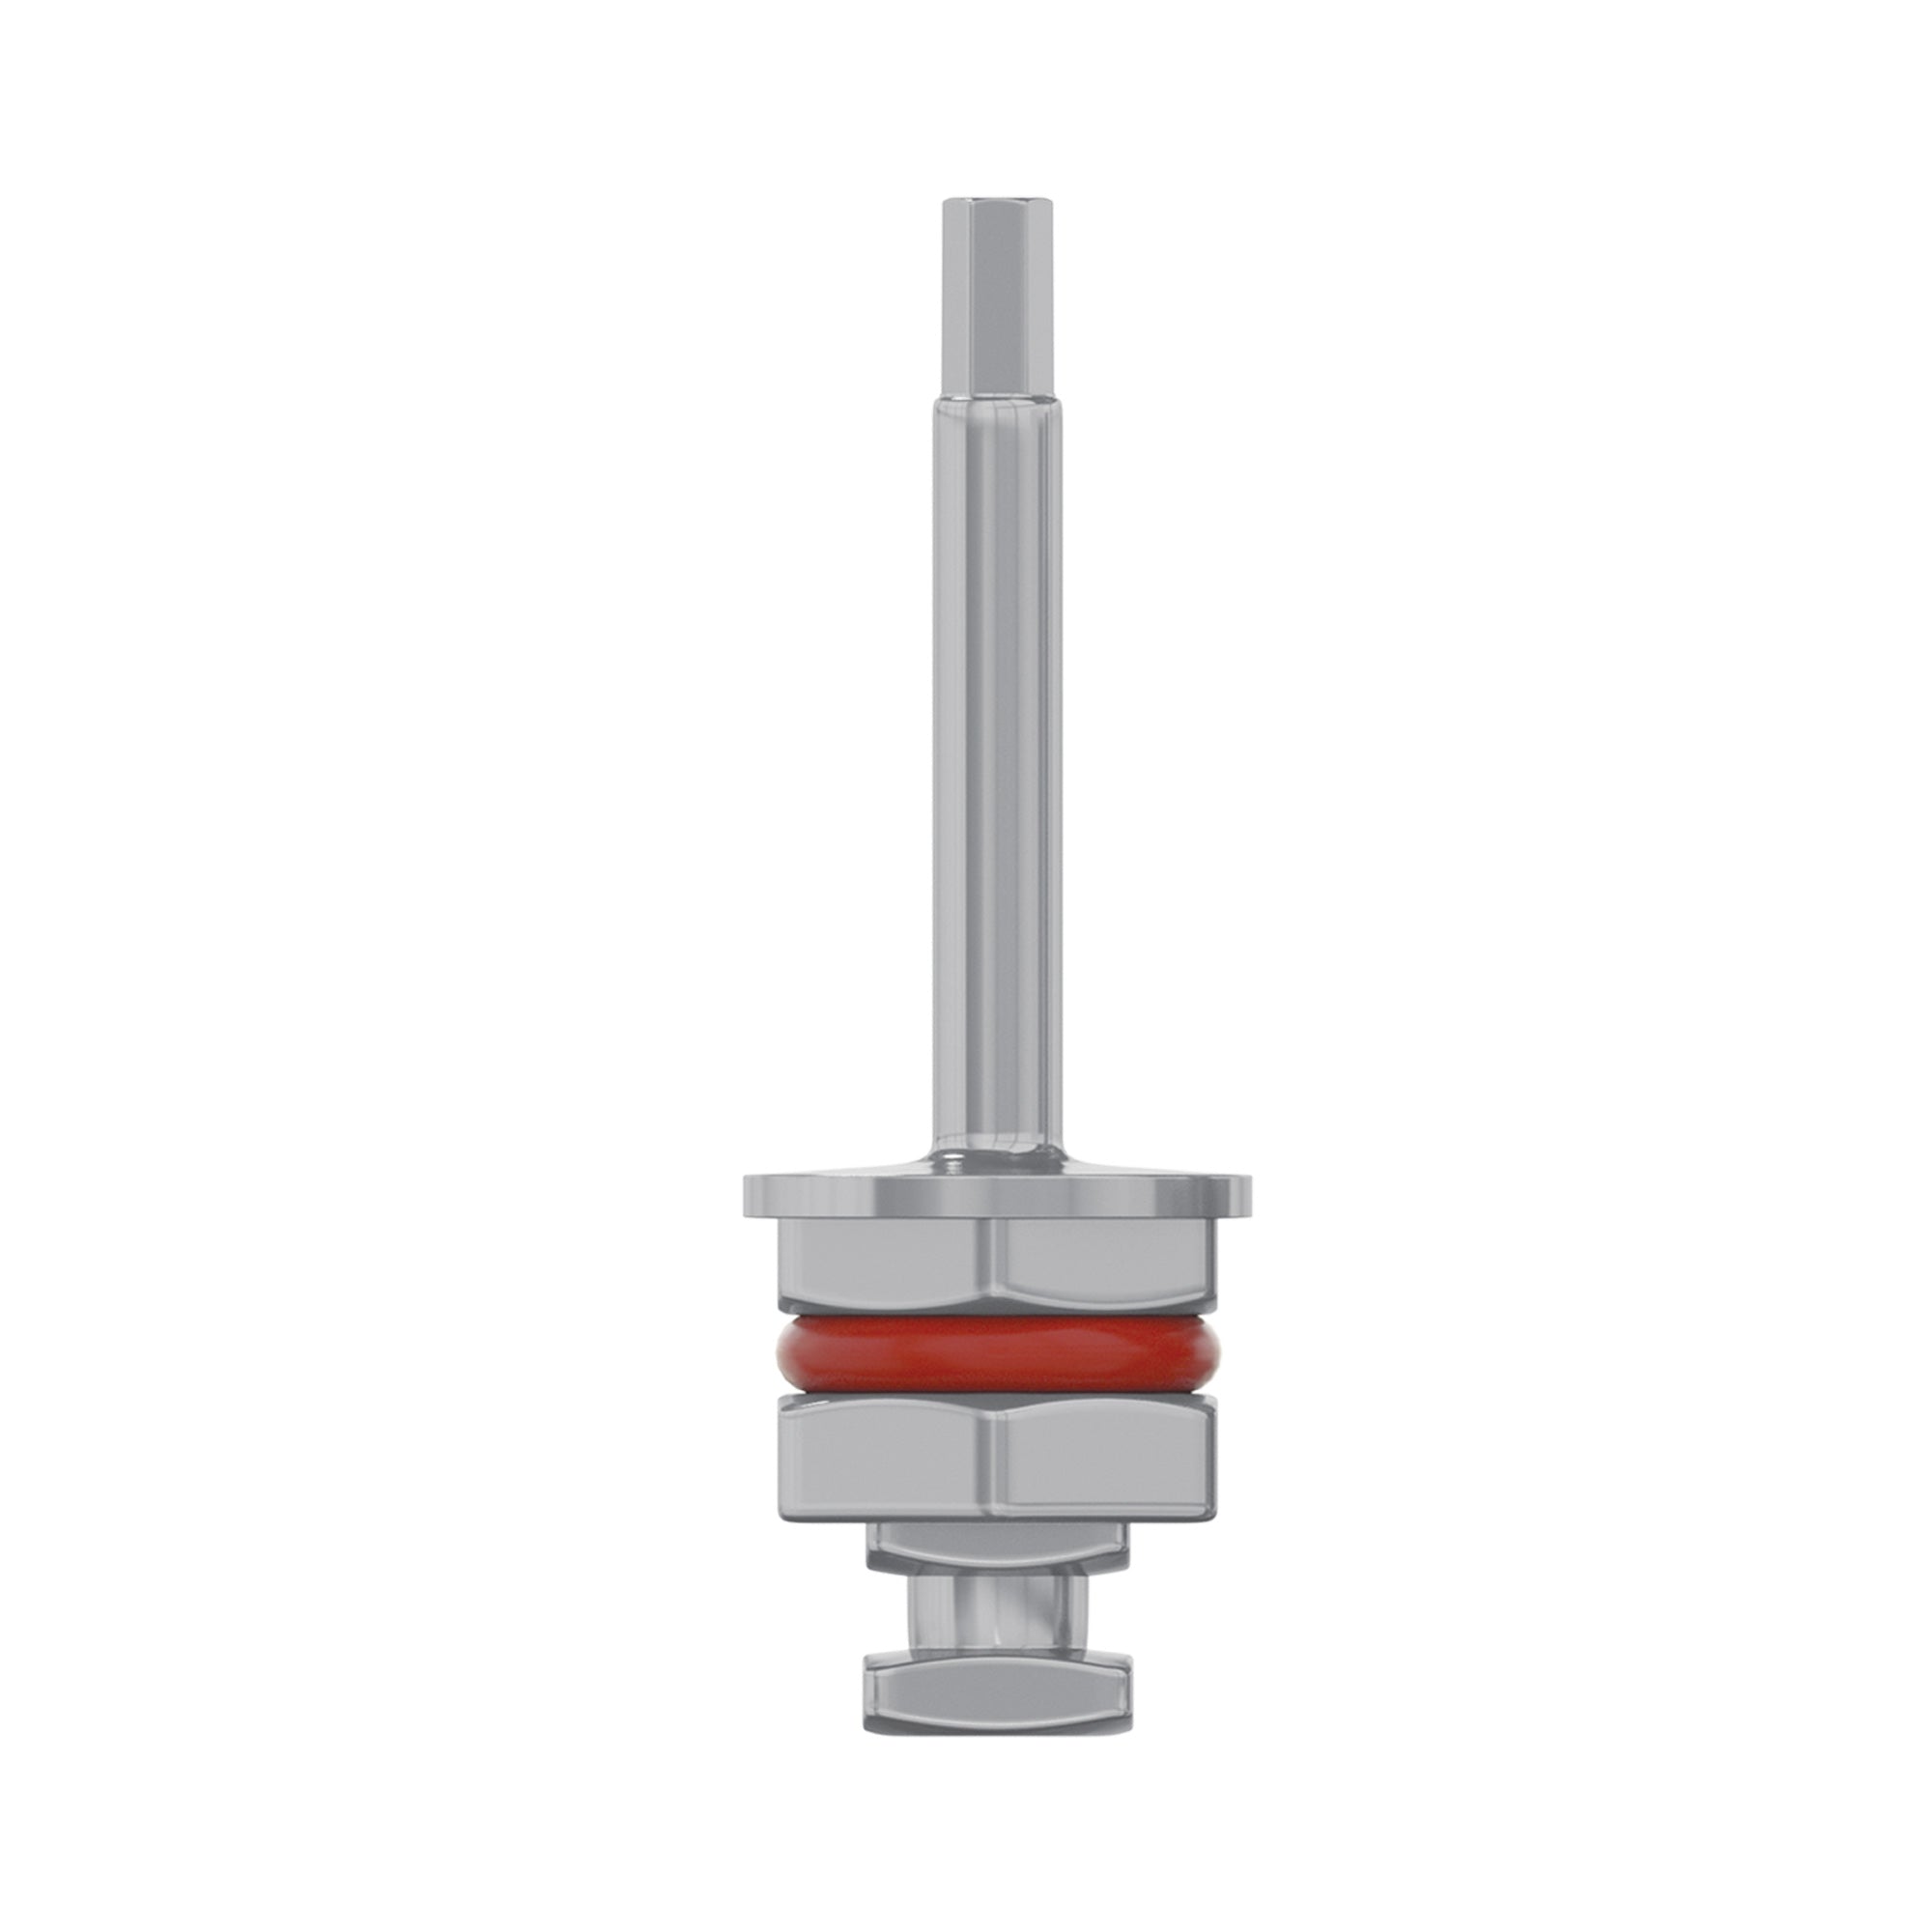 DSI Ratchet Driver For Abutments- Prosthetic Screw Connection Ø1.25mm